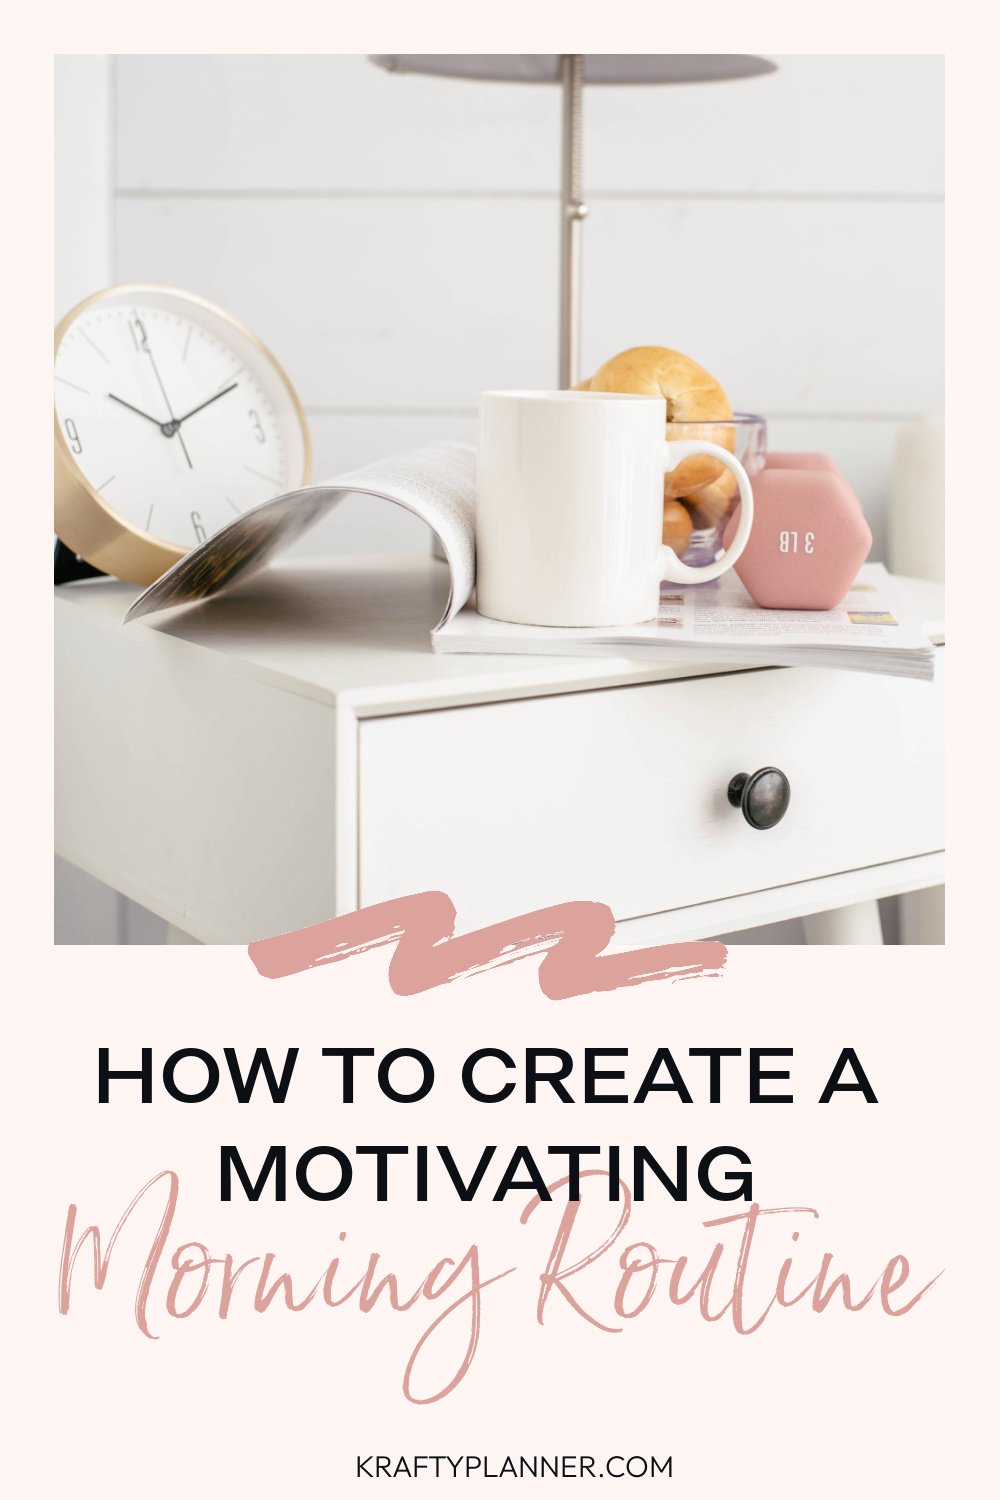 How to Create a Motivating Morning Routine